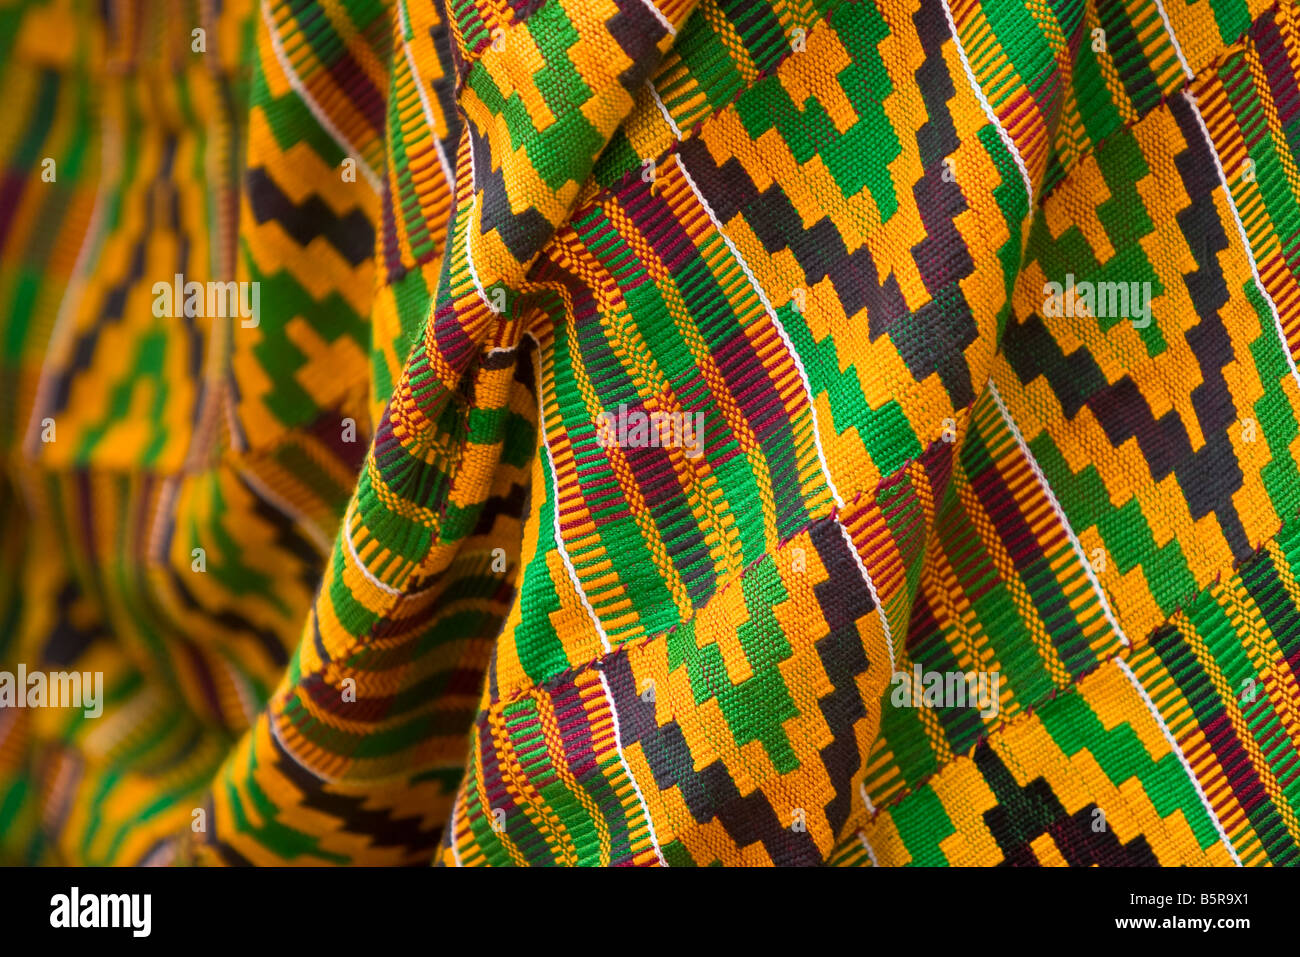 Detail of Herod's Robe worn during an African portrayal of the Stations of the Cross remembered during Easter in Lome, Togo. Stock Photo